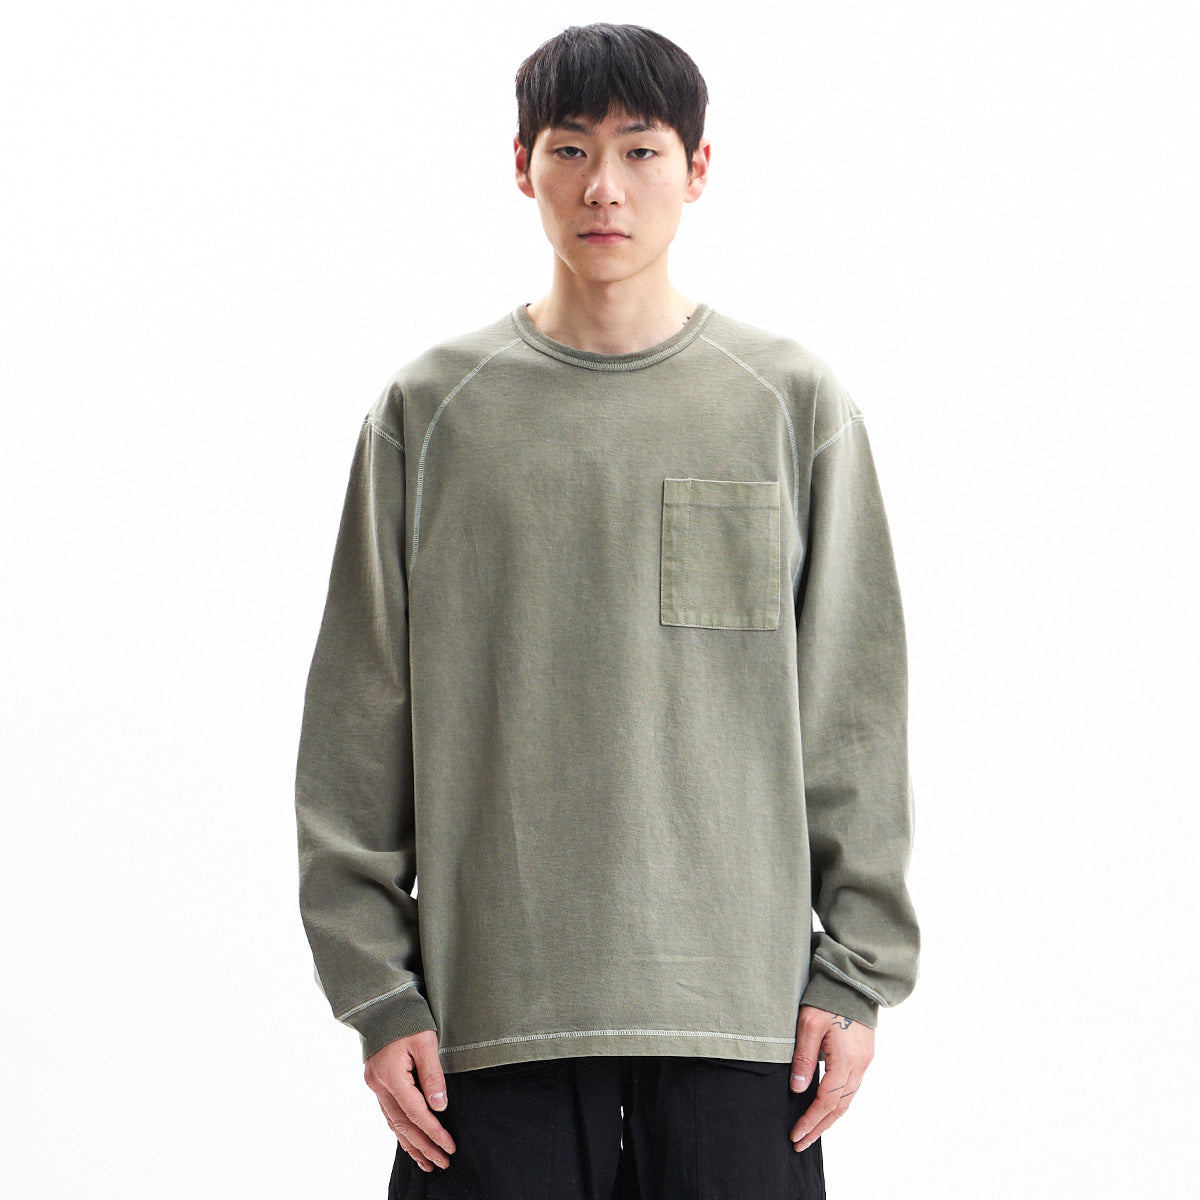 EASTLOGUE 2021SSCS05 COVER STITCH T-SHIRT - OLIVE